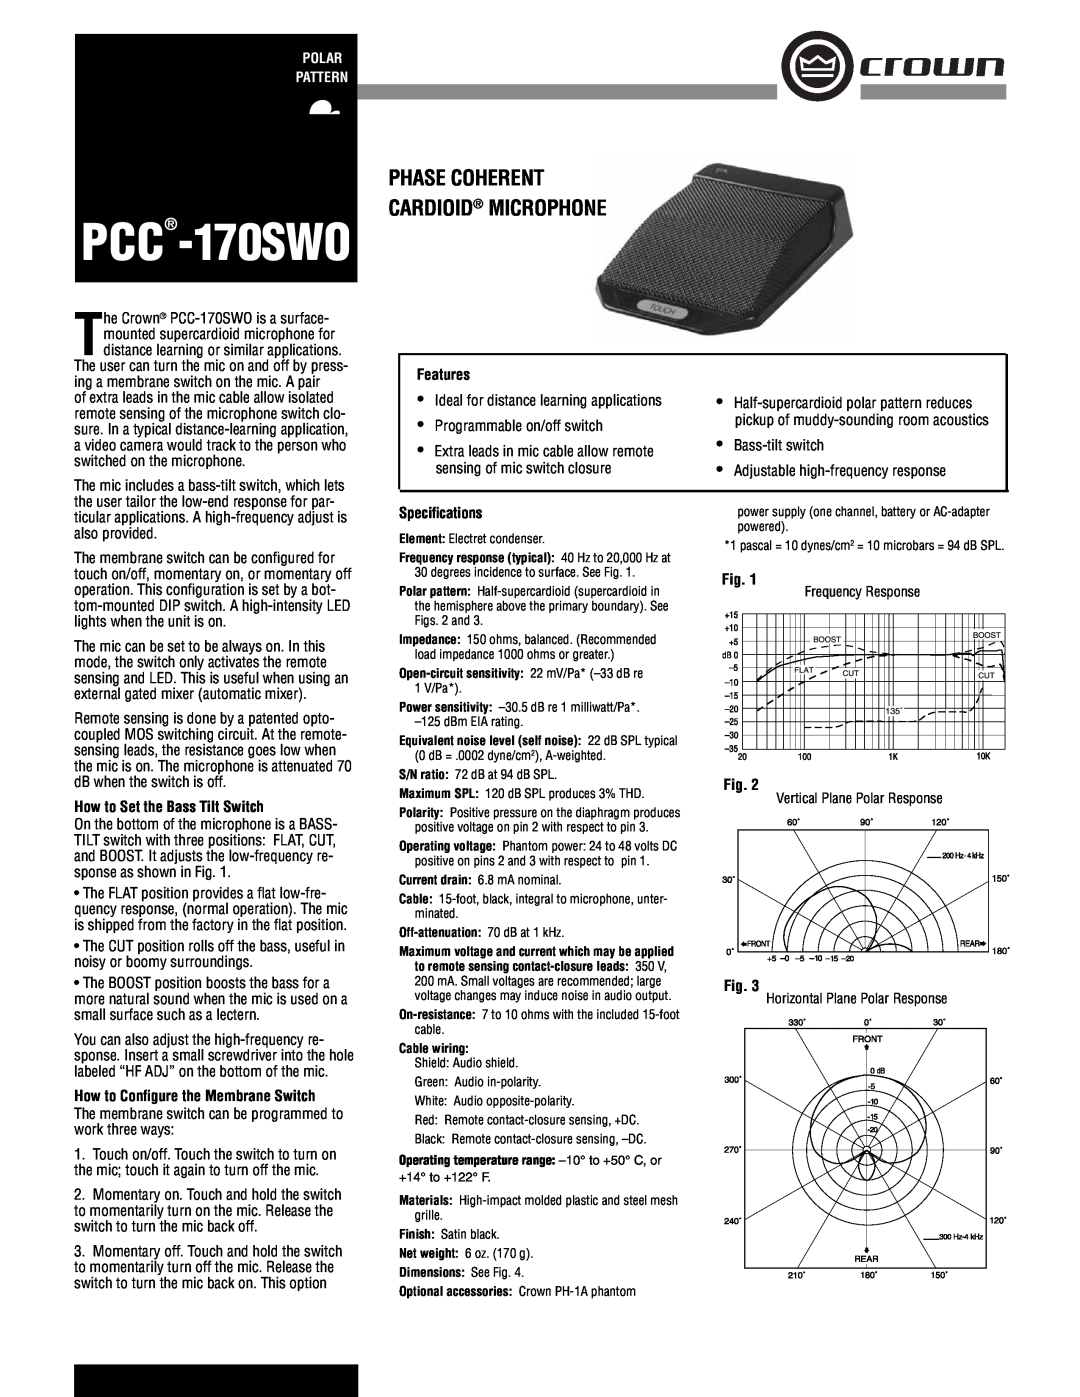 Crown Audio PCC-170SWO specifications Features, How to Set the Bass Tilt Switch, How to Conﬁgure the Membrane Switch 